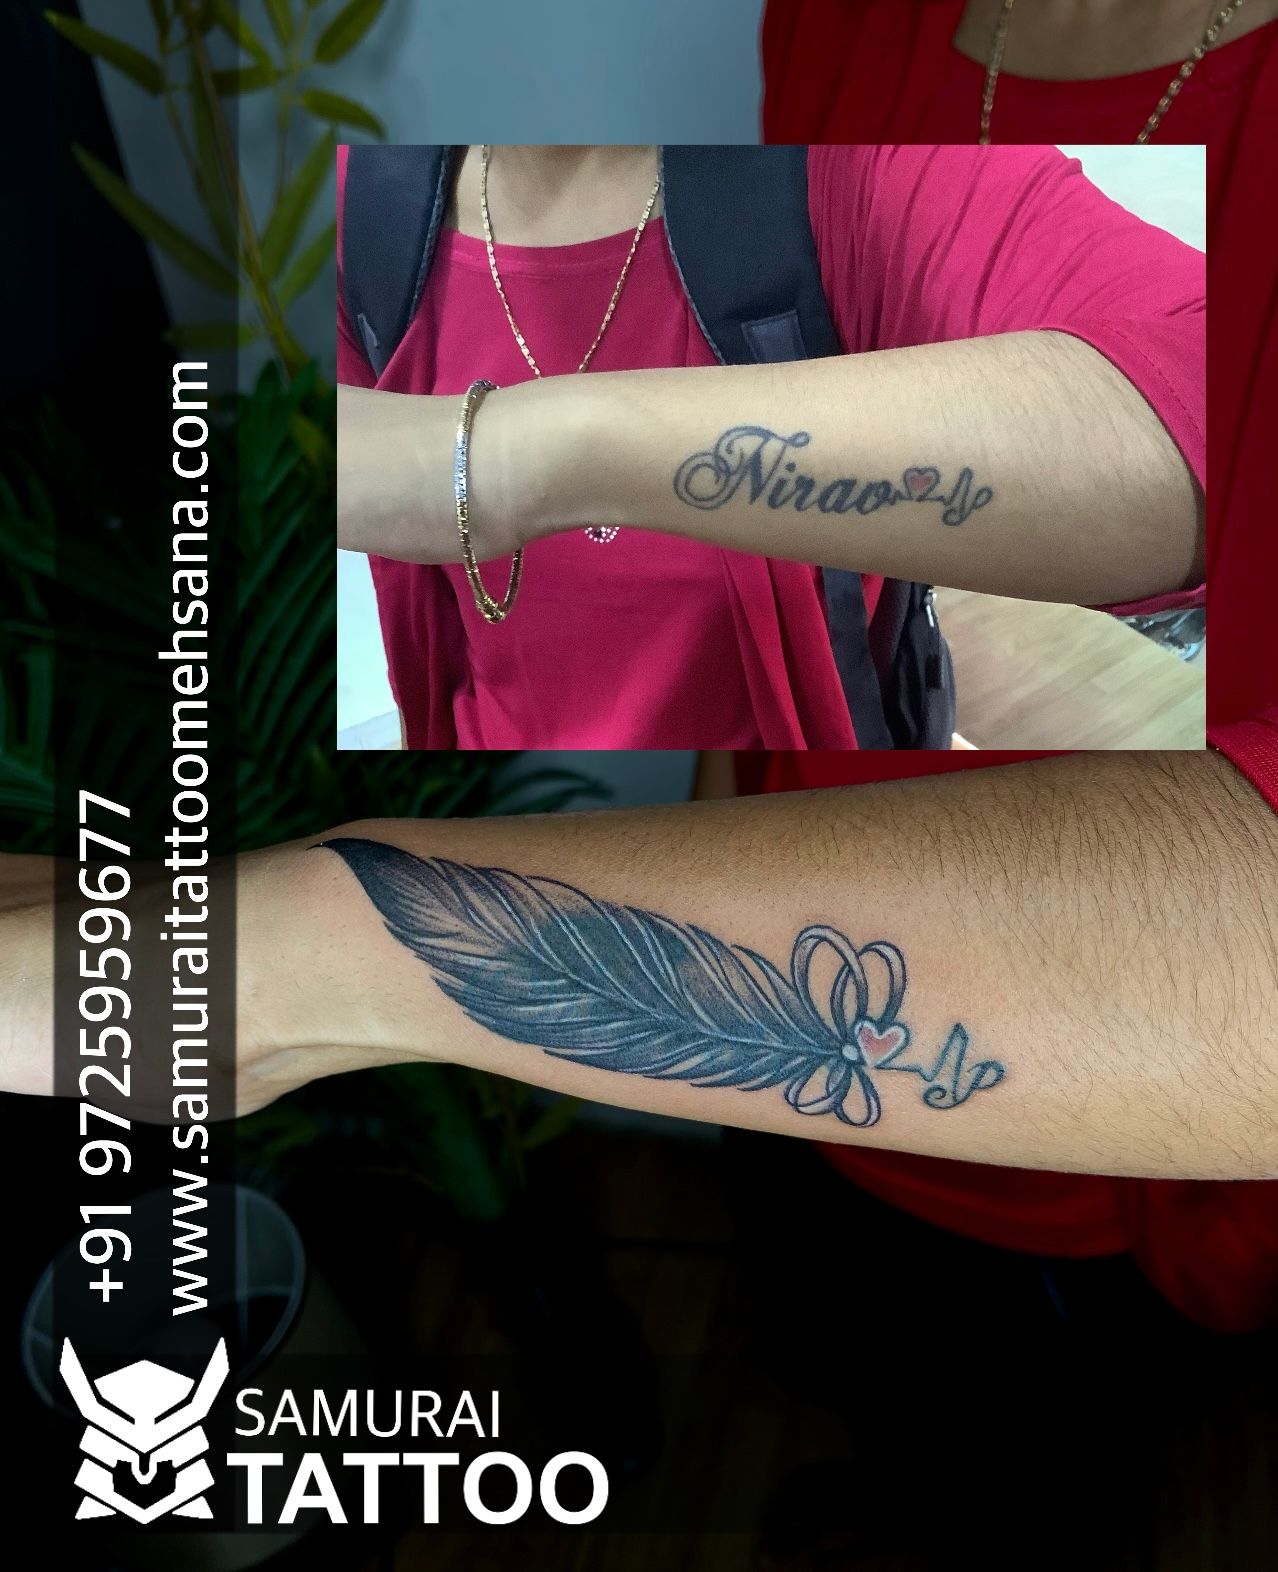 Angel Tattoo Studio & Tattoo Training Institute - Infinity with feather  tattoo design. For appointment and inquiry call 📱 9993962341  #infinitytattoo #feathertattoo #infinitywithfeathertattoo #initialstattoo  #colortattoo #forfemale #tattooedgirls ...